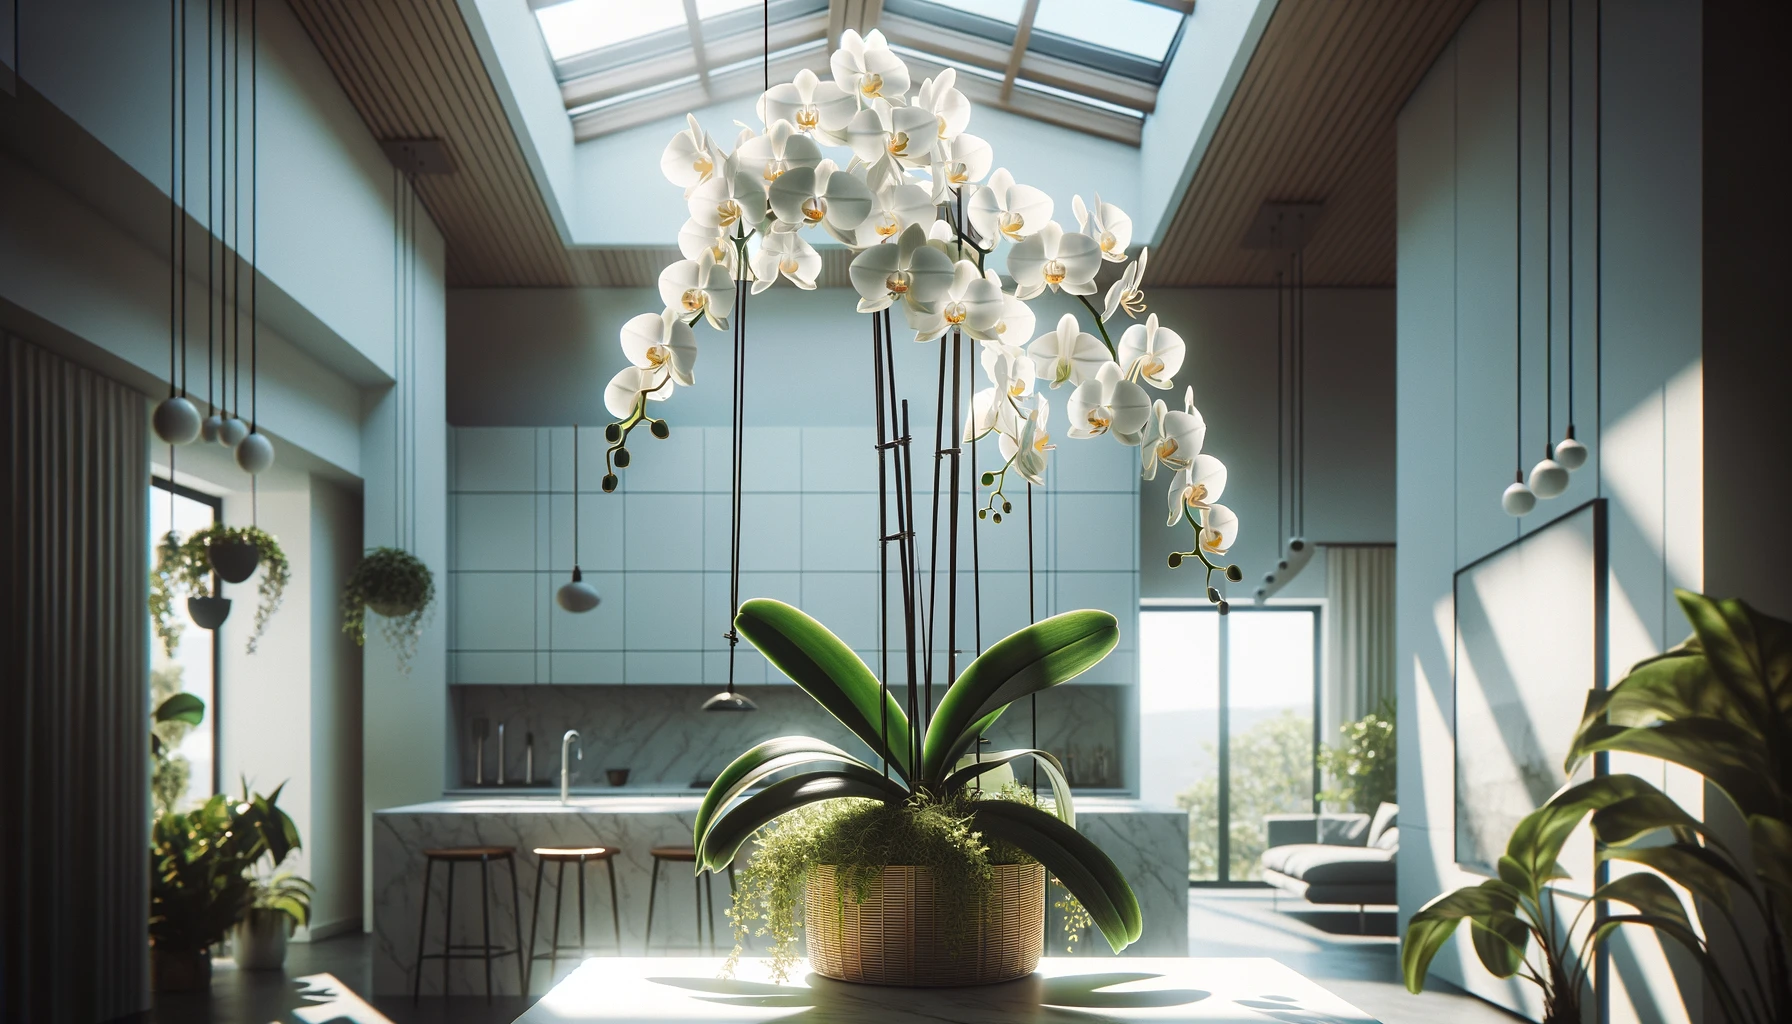 Elegant interior with white orchids and modern kitchen.